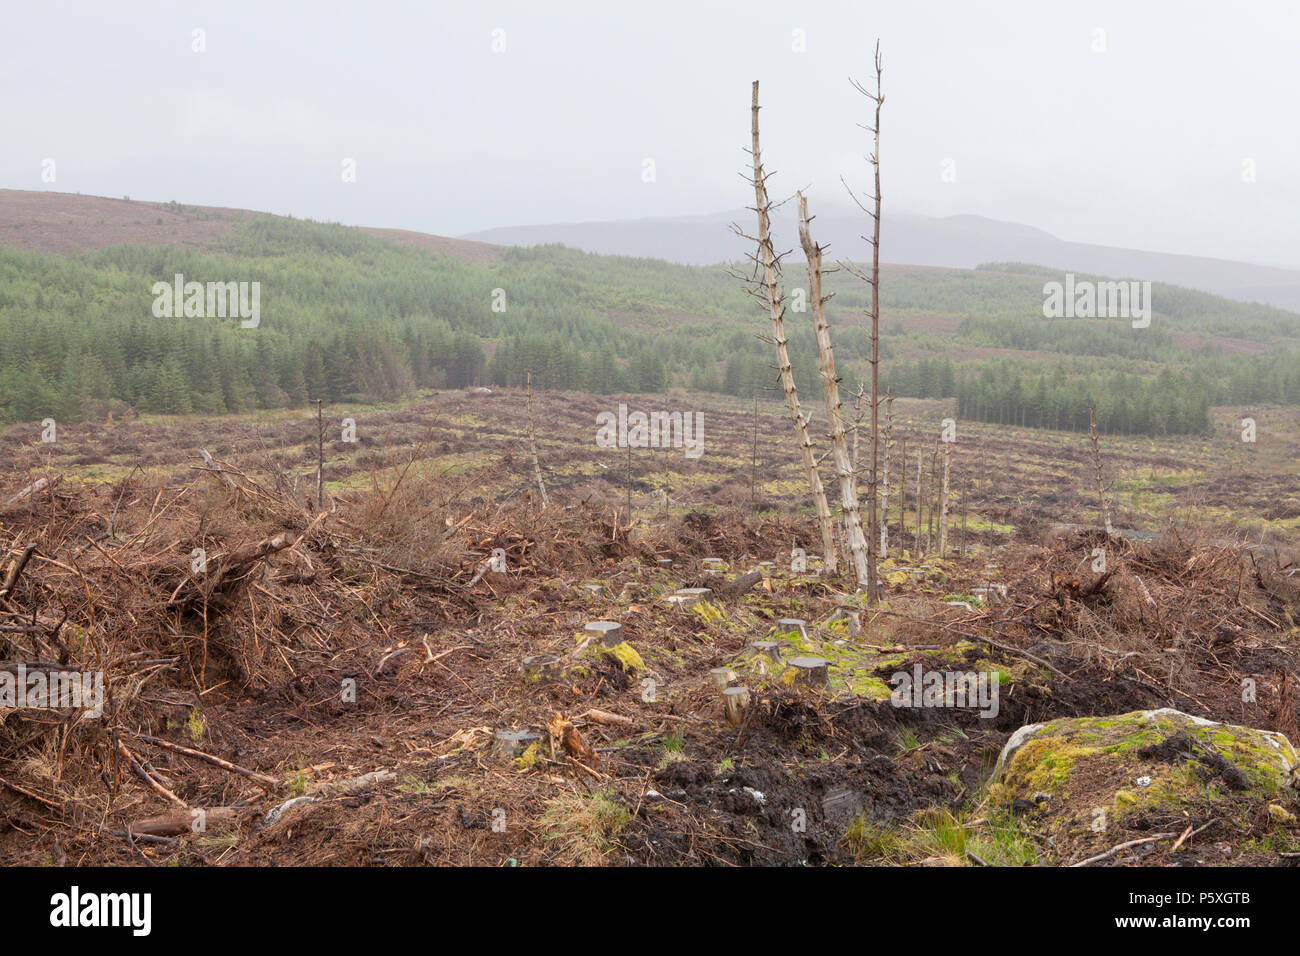 Commercial forestry in the Wicklow Mountains of Ireland, showing the destruction of a fragile peat bog environment Stock Photo